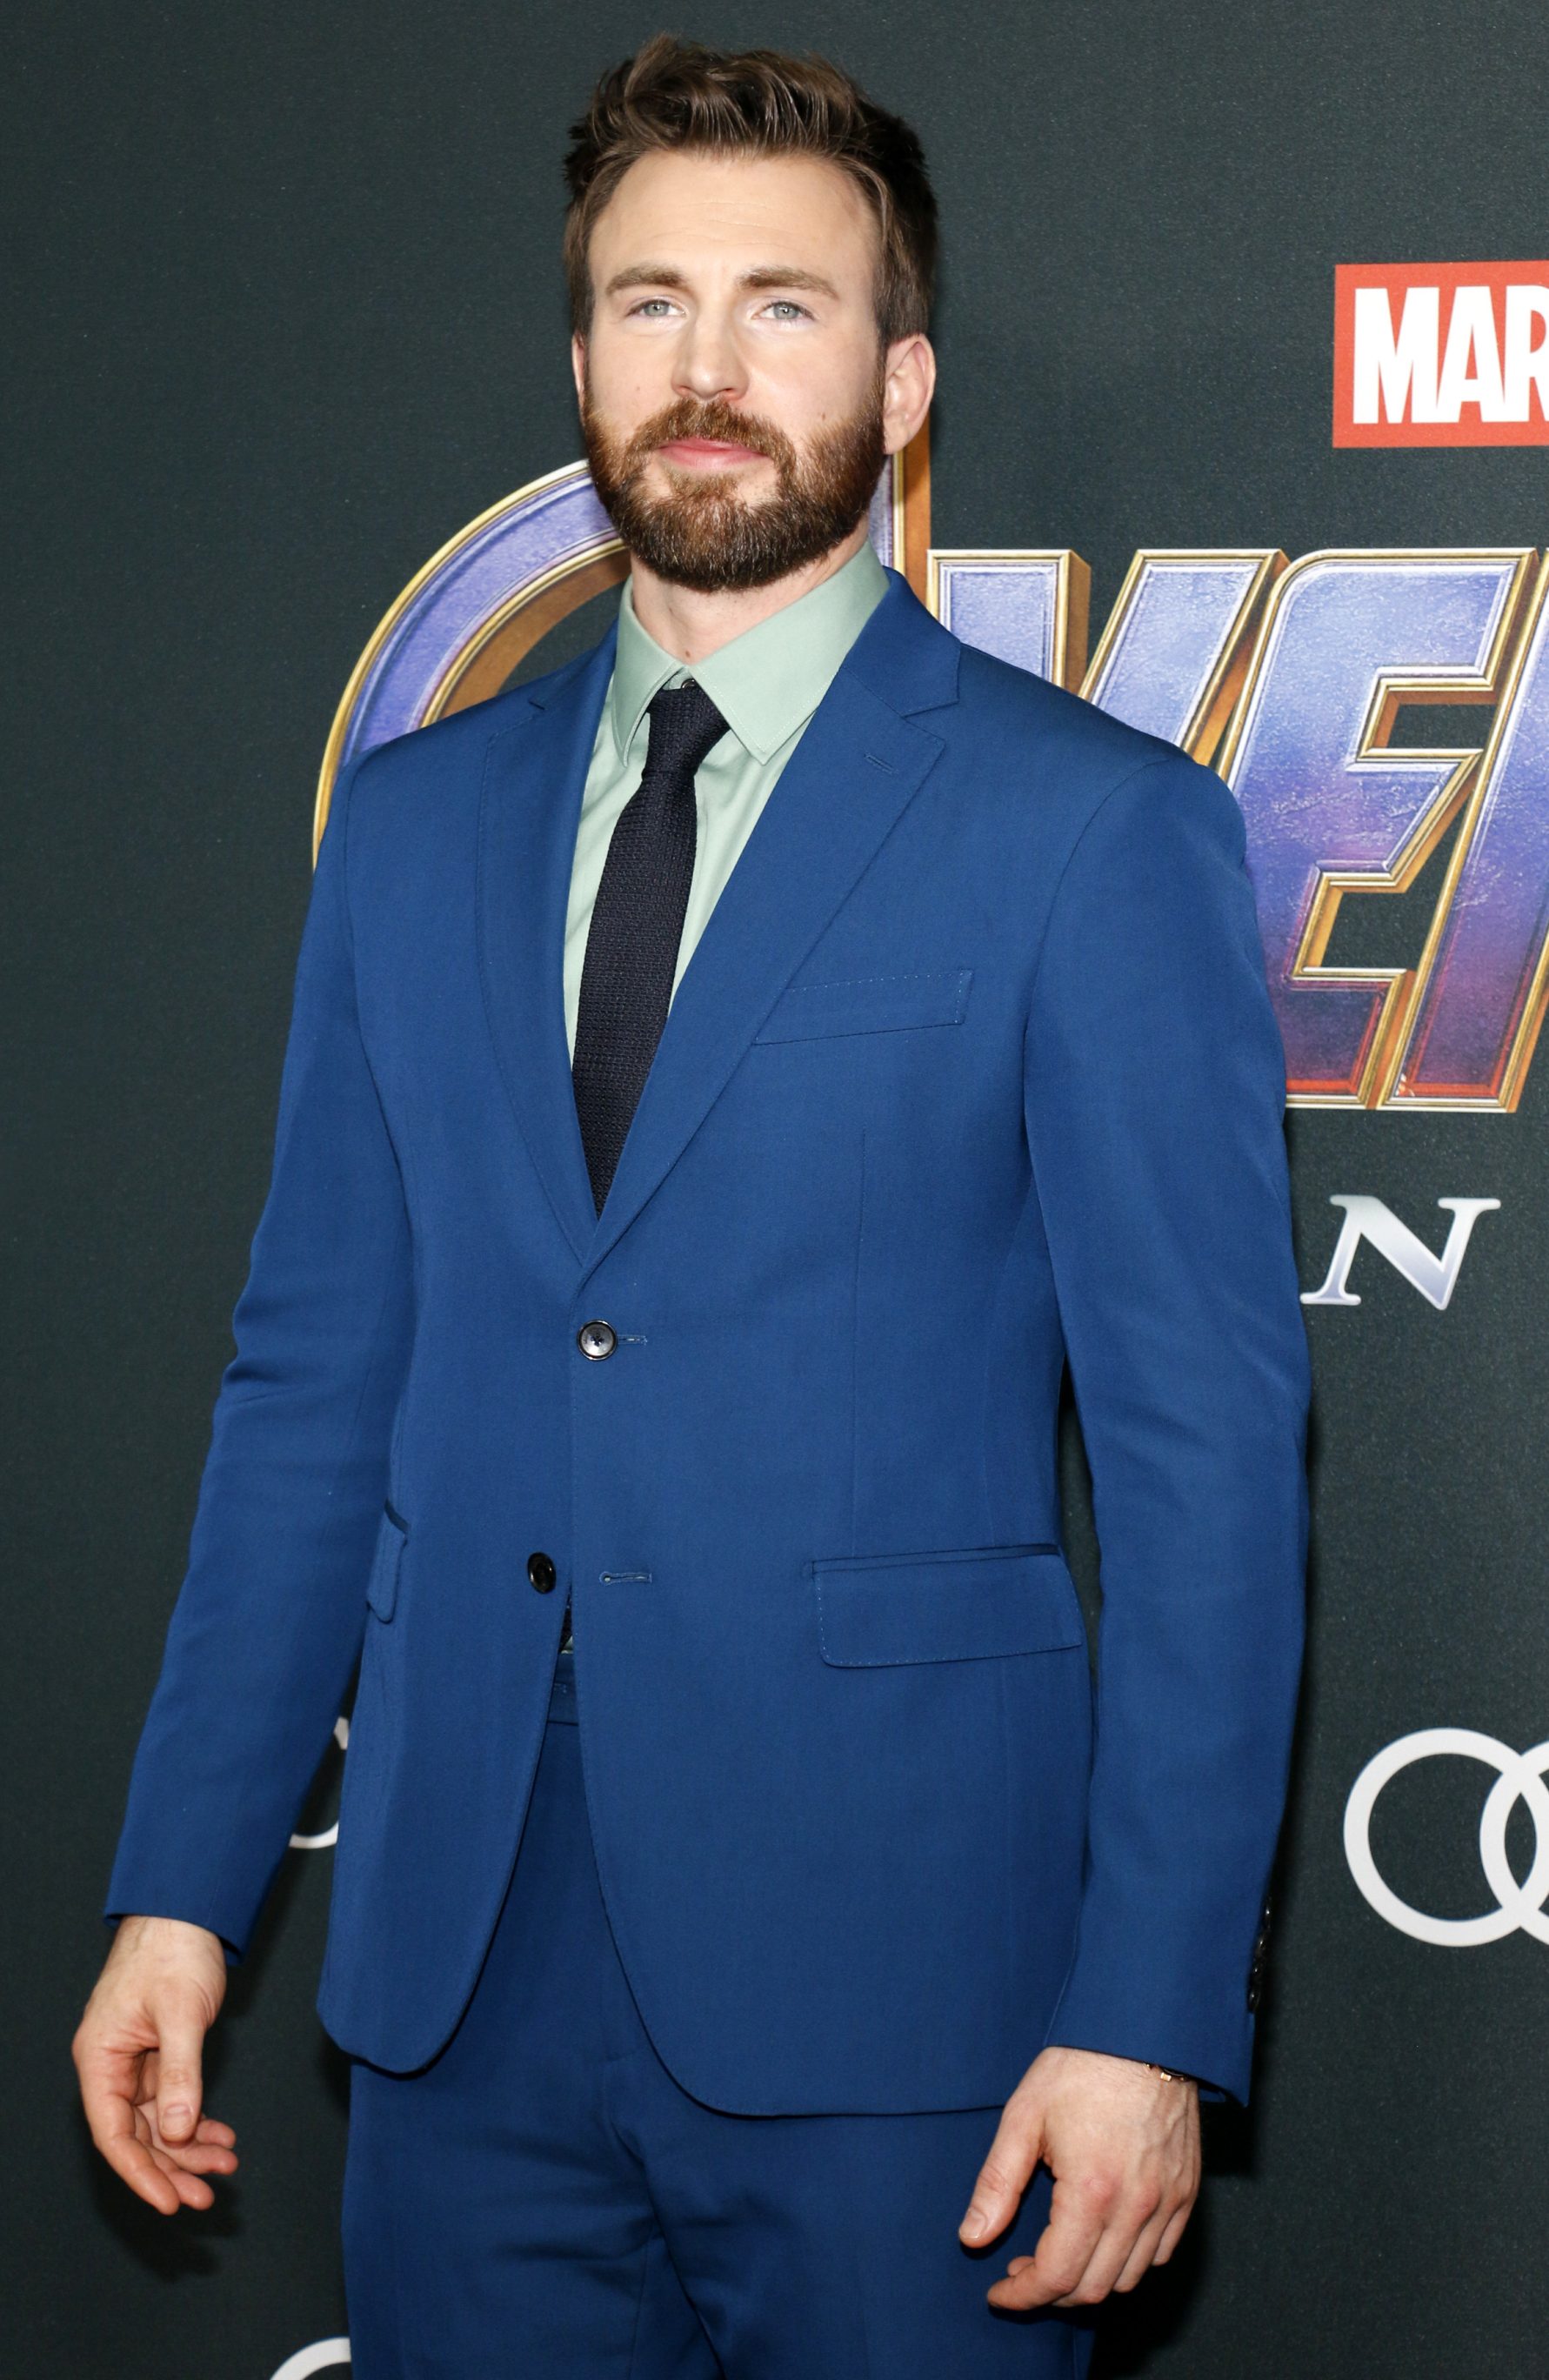 Chris Evans - The Most Attractive Captain America on The Screen